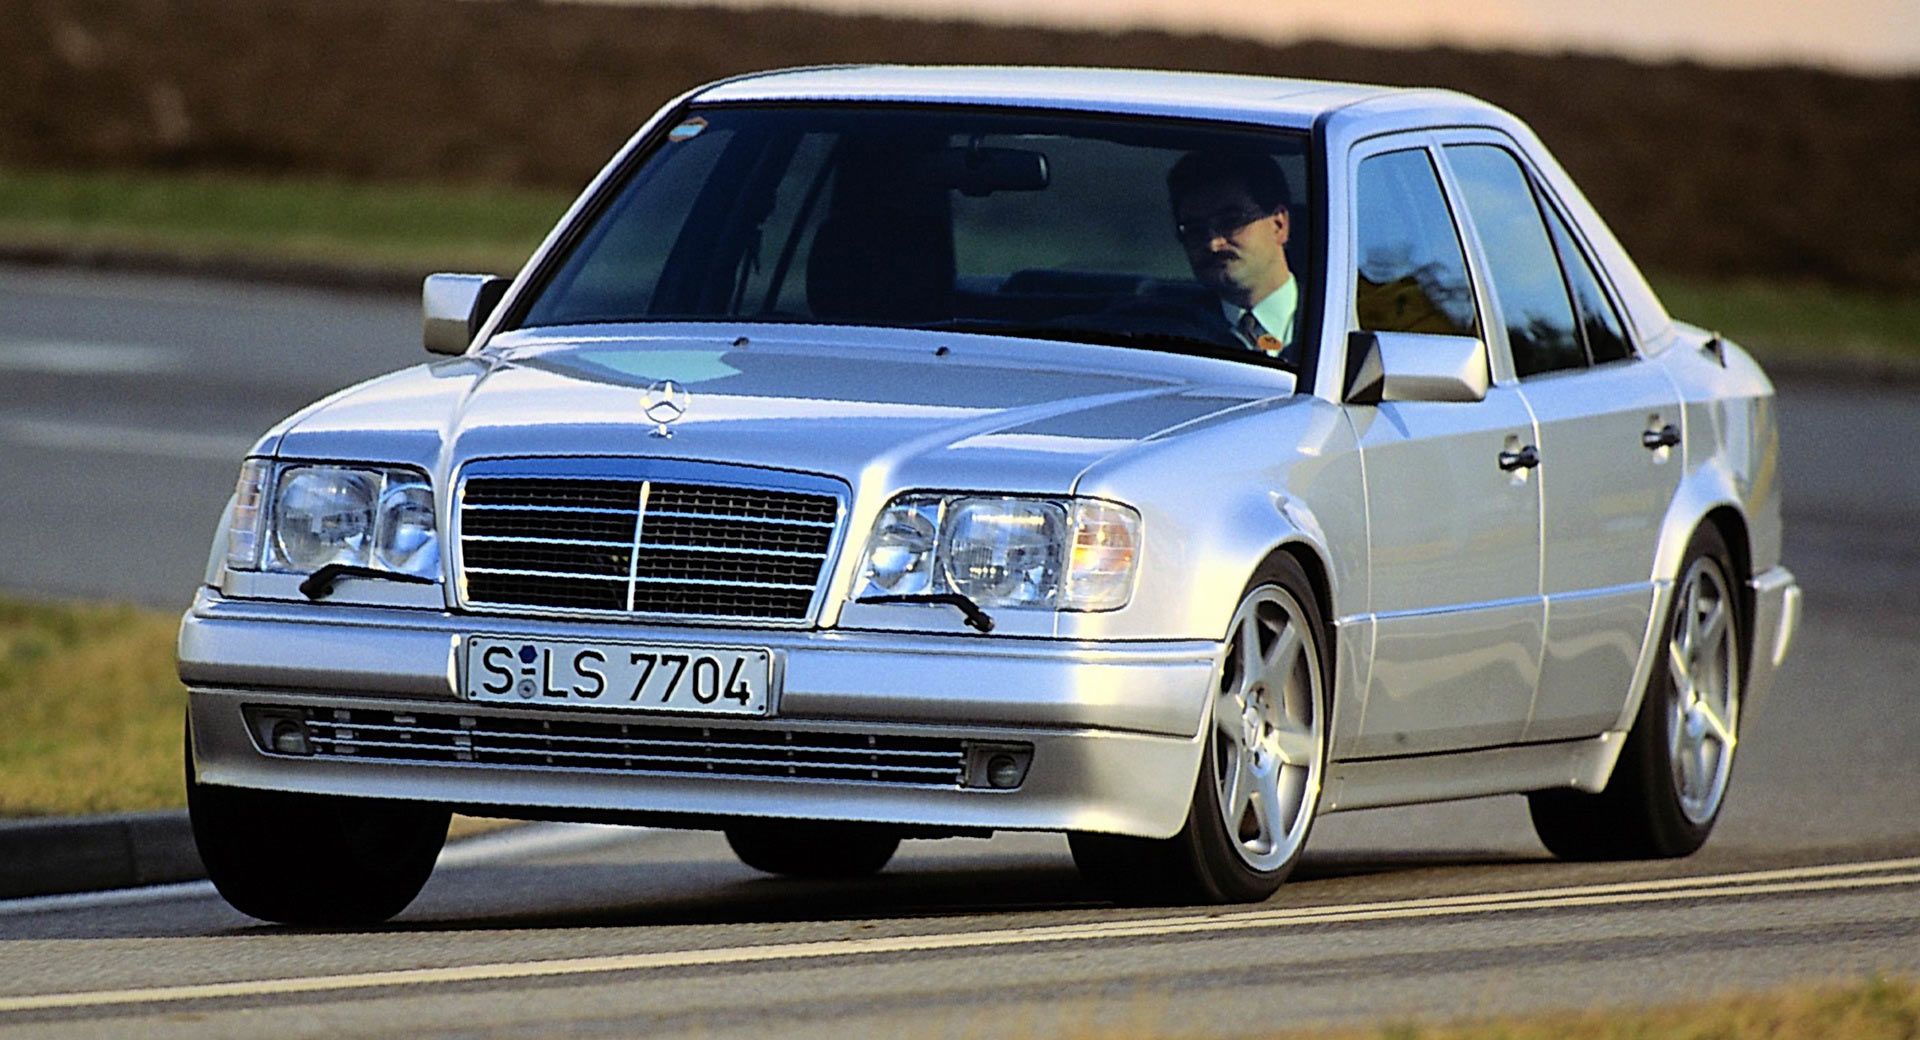 Mercedes 500E on the road